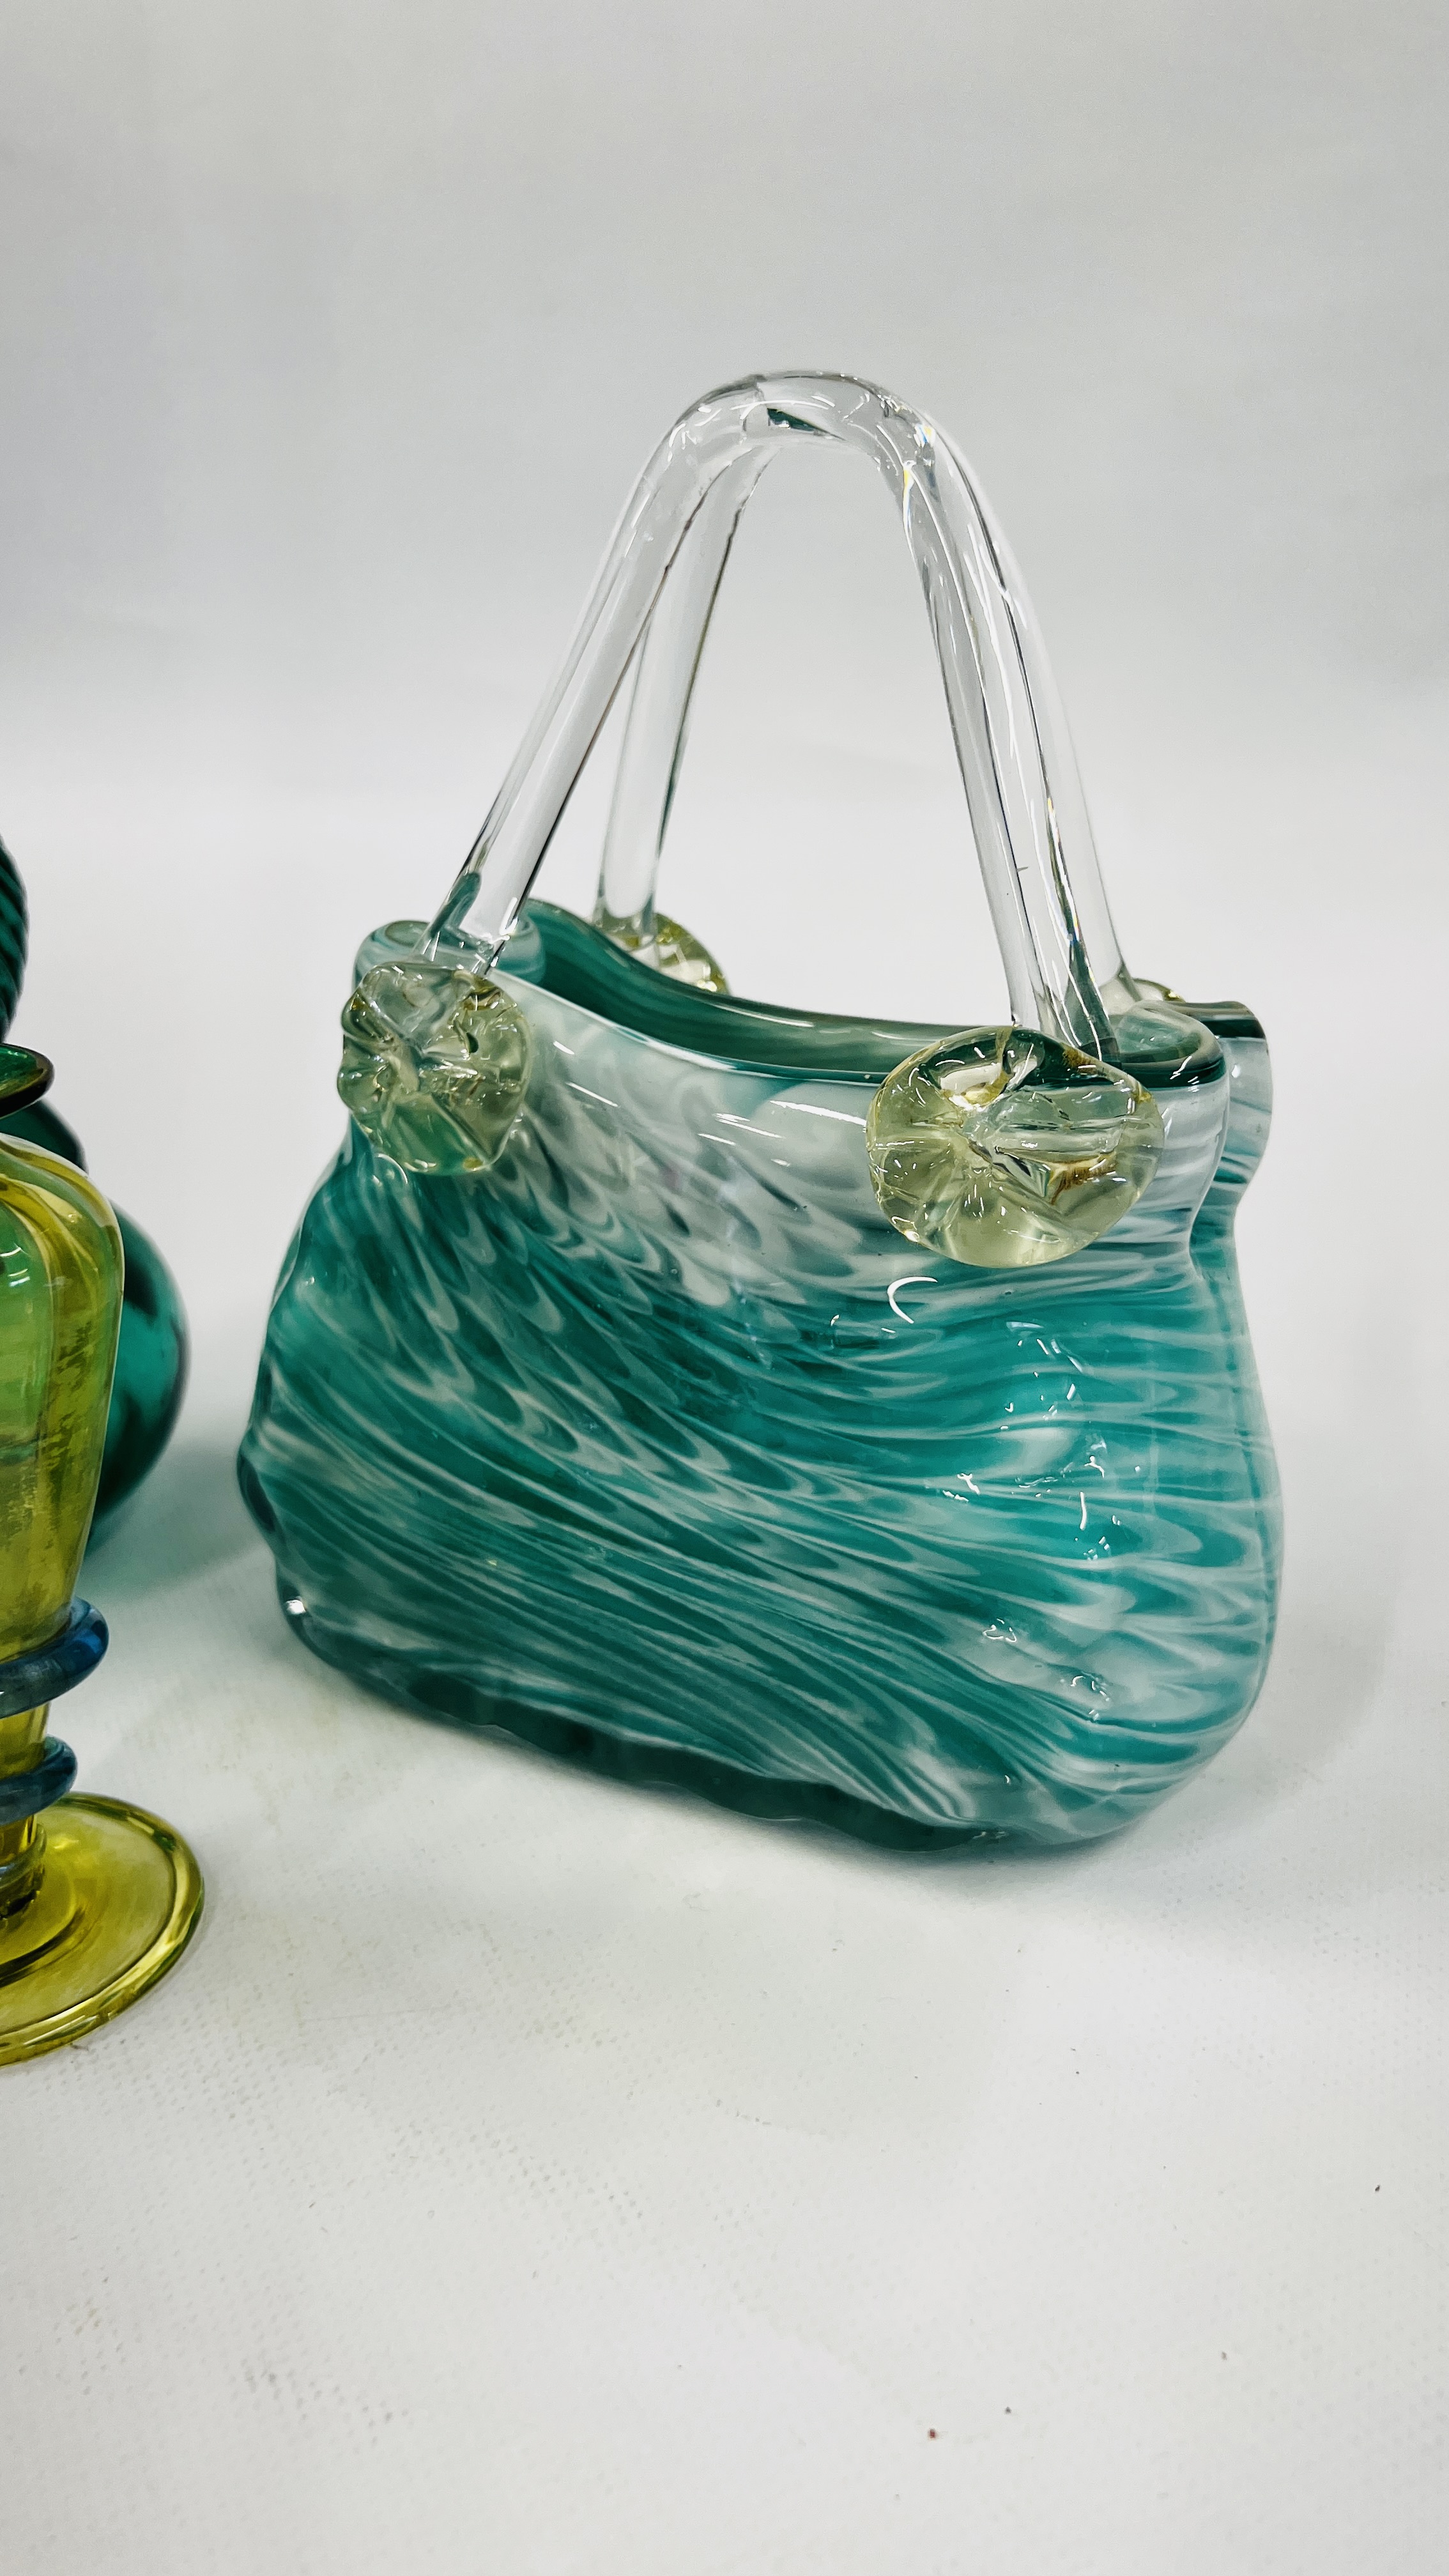 A VINTAGE GREEN GLASS BOTTLE MARKED "SHONFELDS" ALONG WITH AN ART GLASS BASKET AND A VICTORIAN - Image 5 of 7